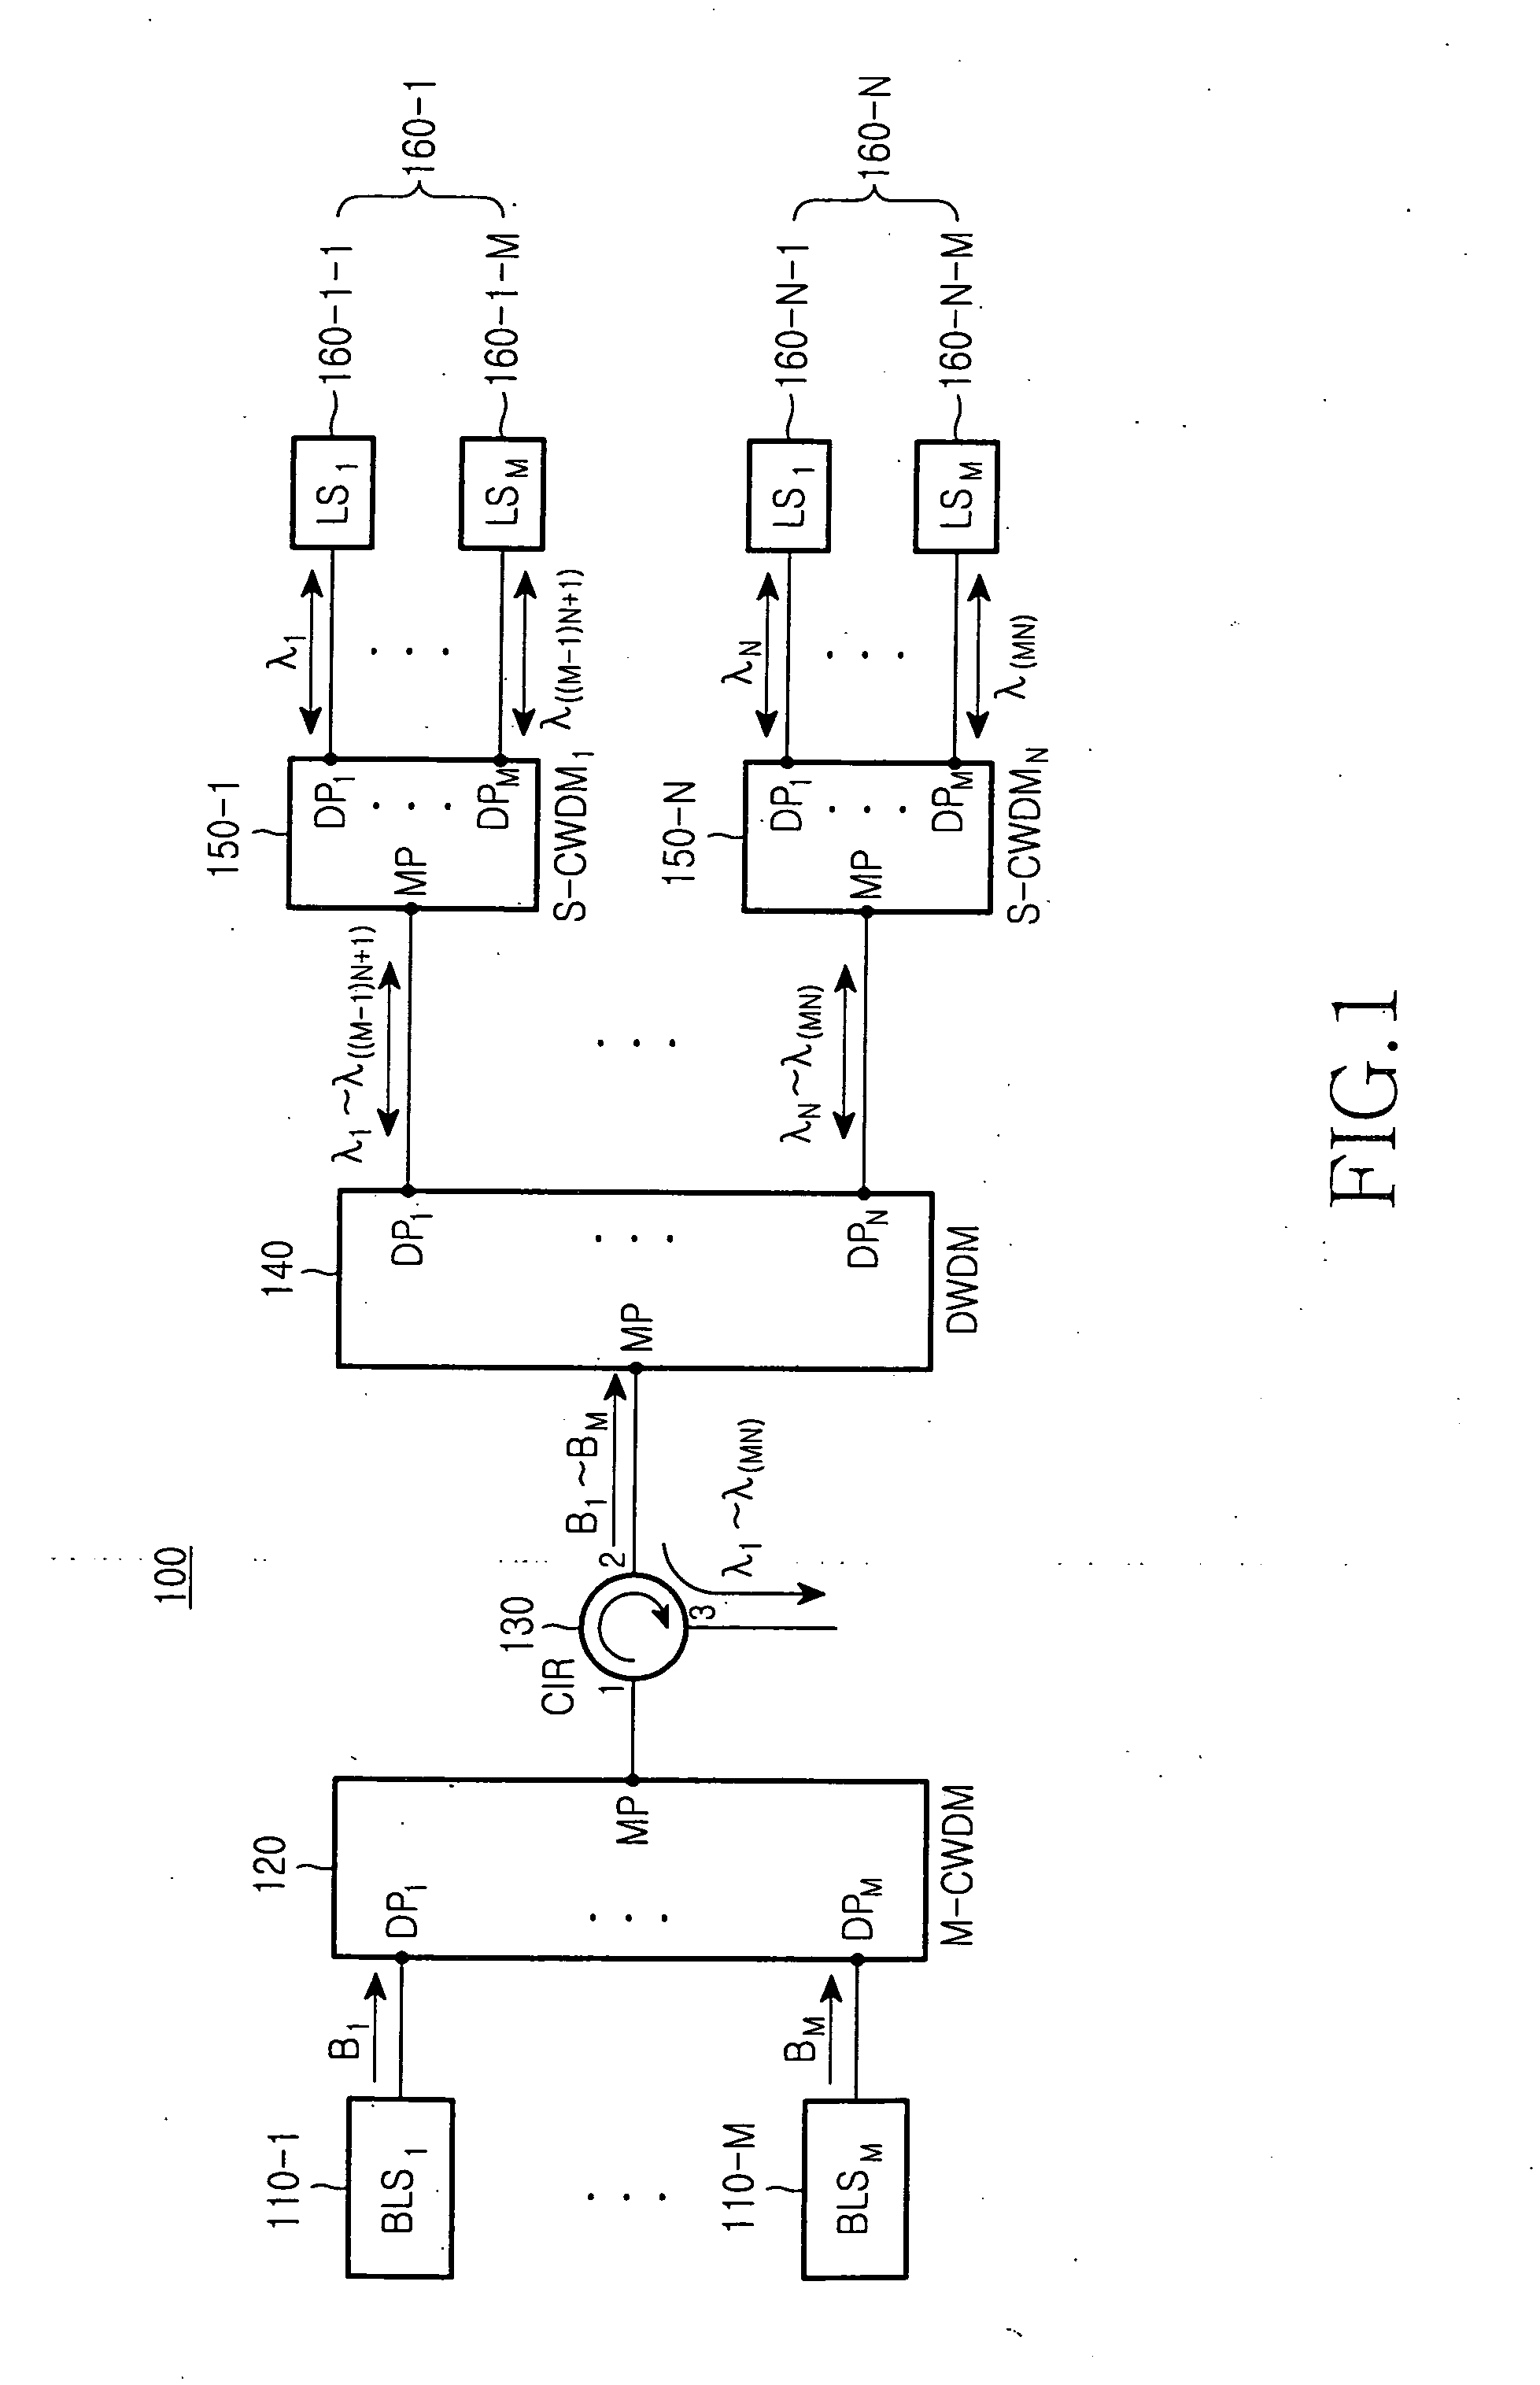 Wavelength division multiplexed light source and passive optical network using the same